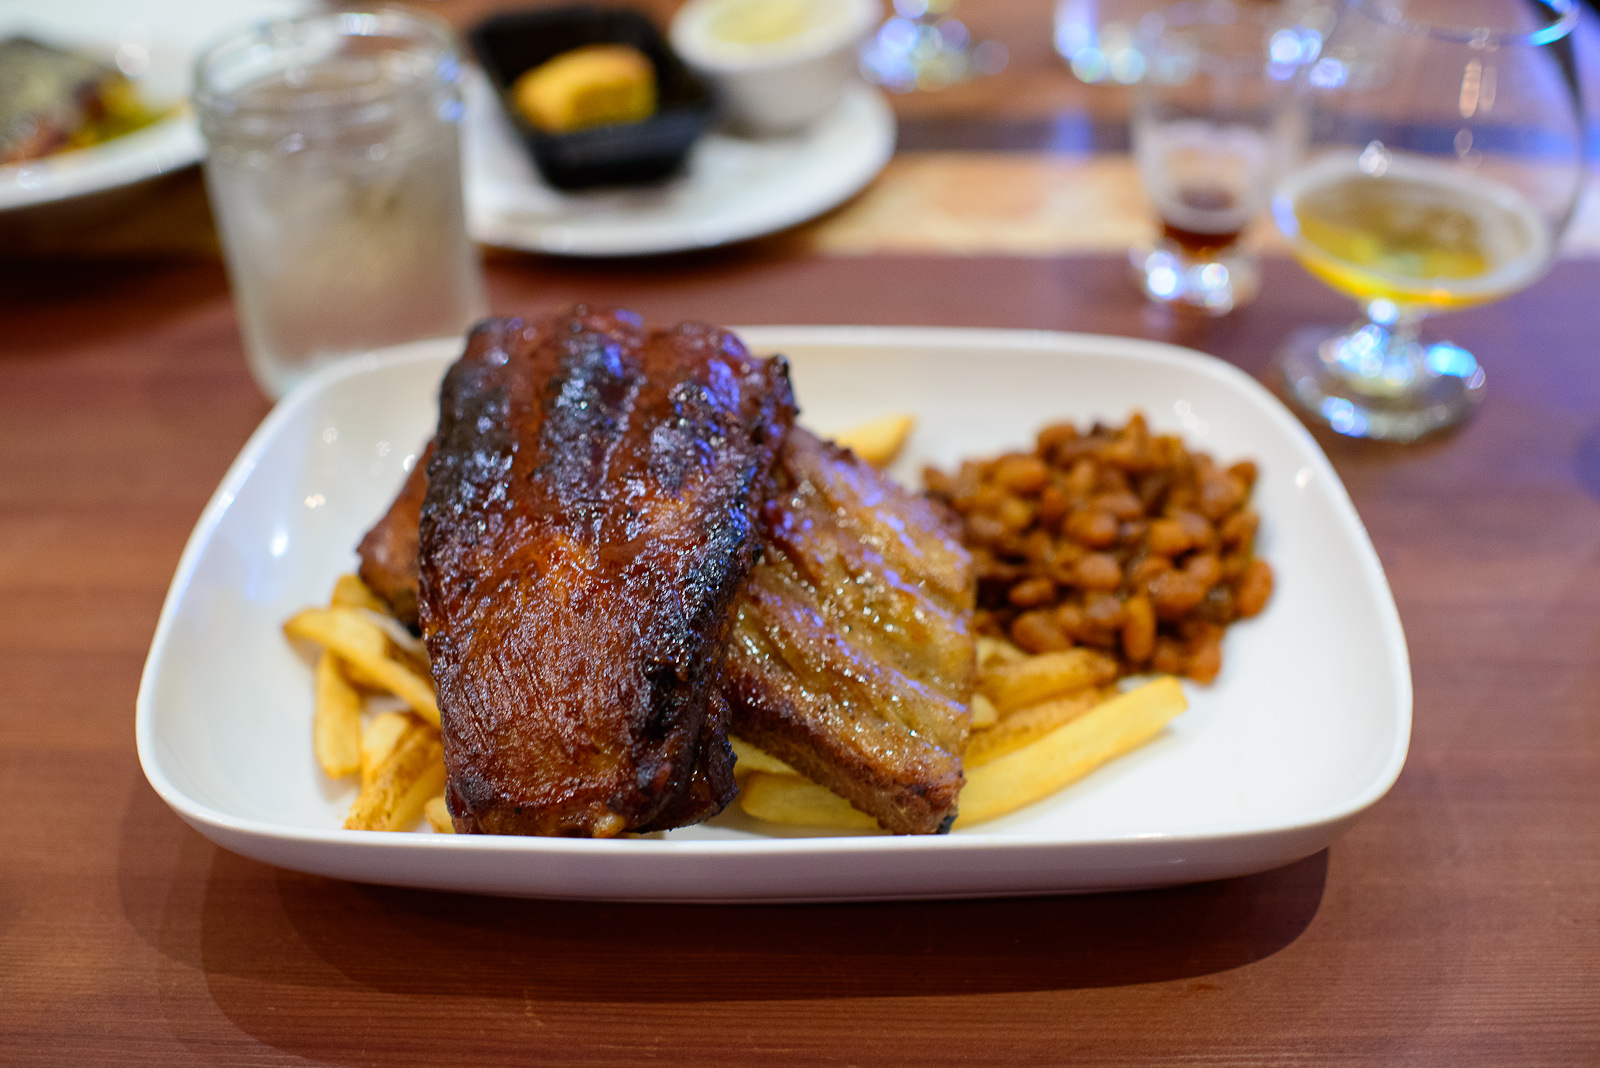 St. Louis-style ribs - barbecue baked beans, french fries ($25)